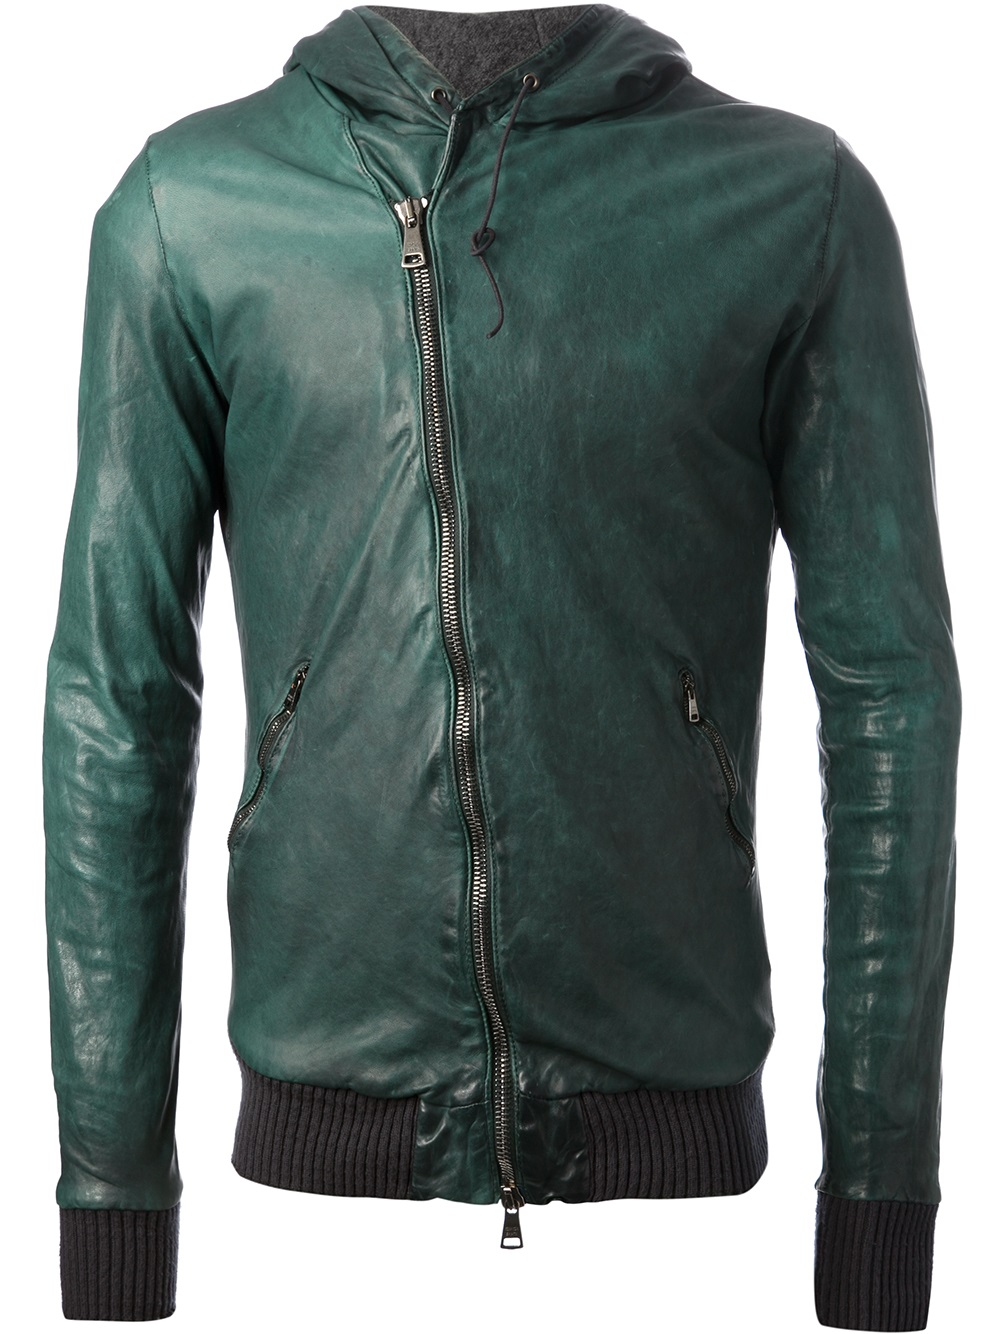 Lyst - Giorgio brato Hooded Leather Jacket in Green for Men